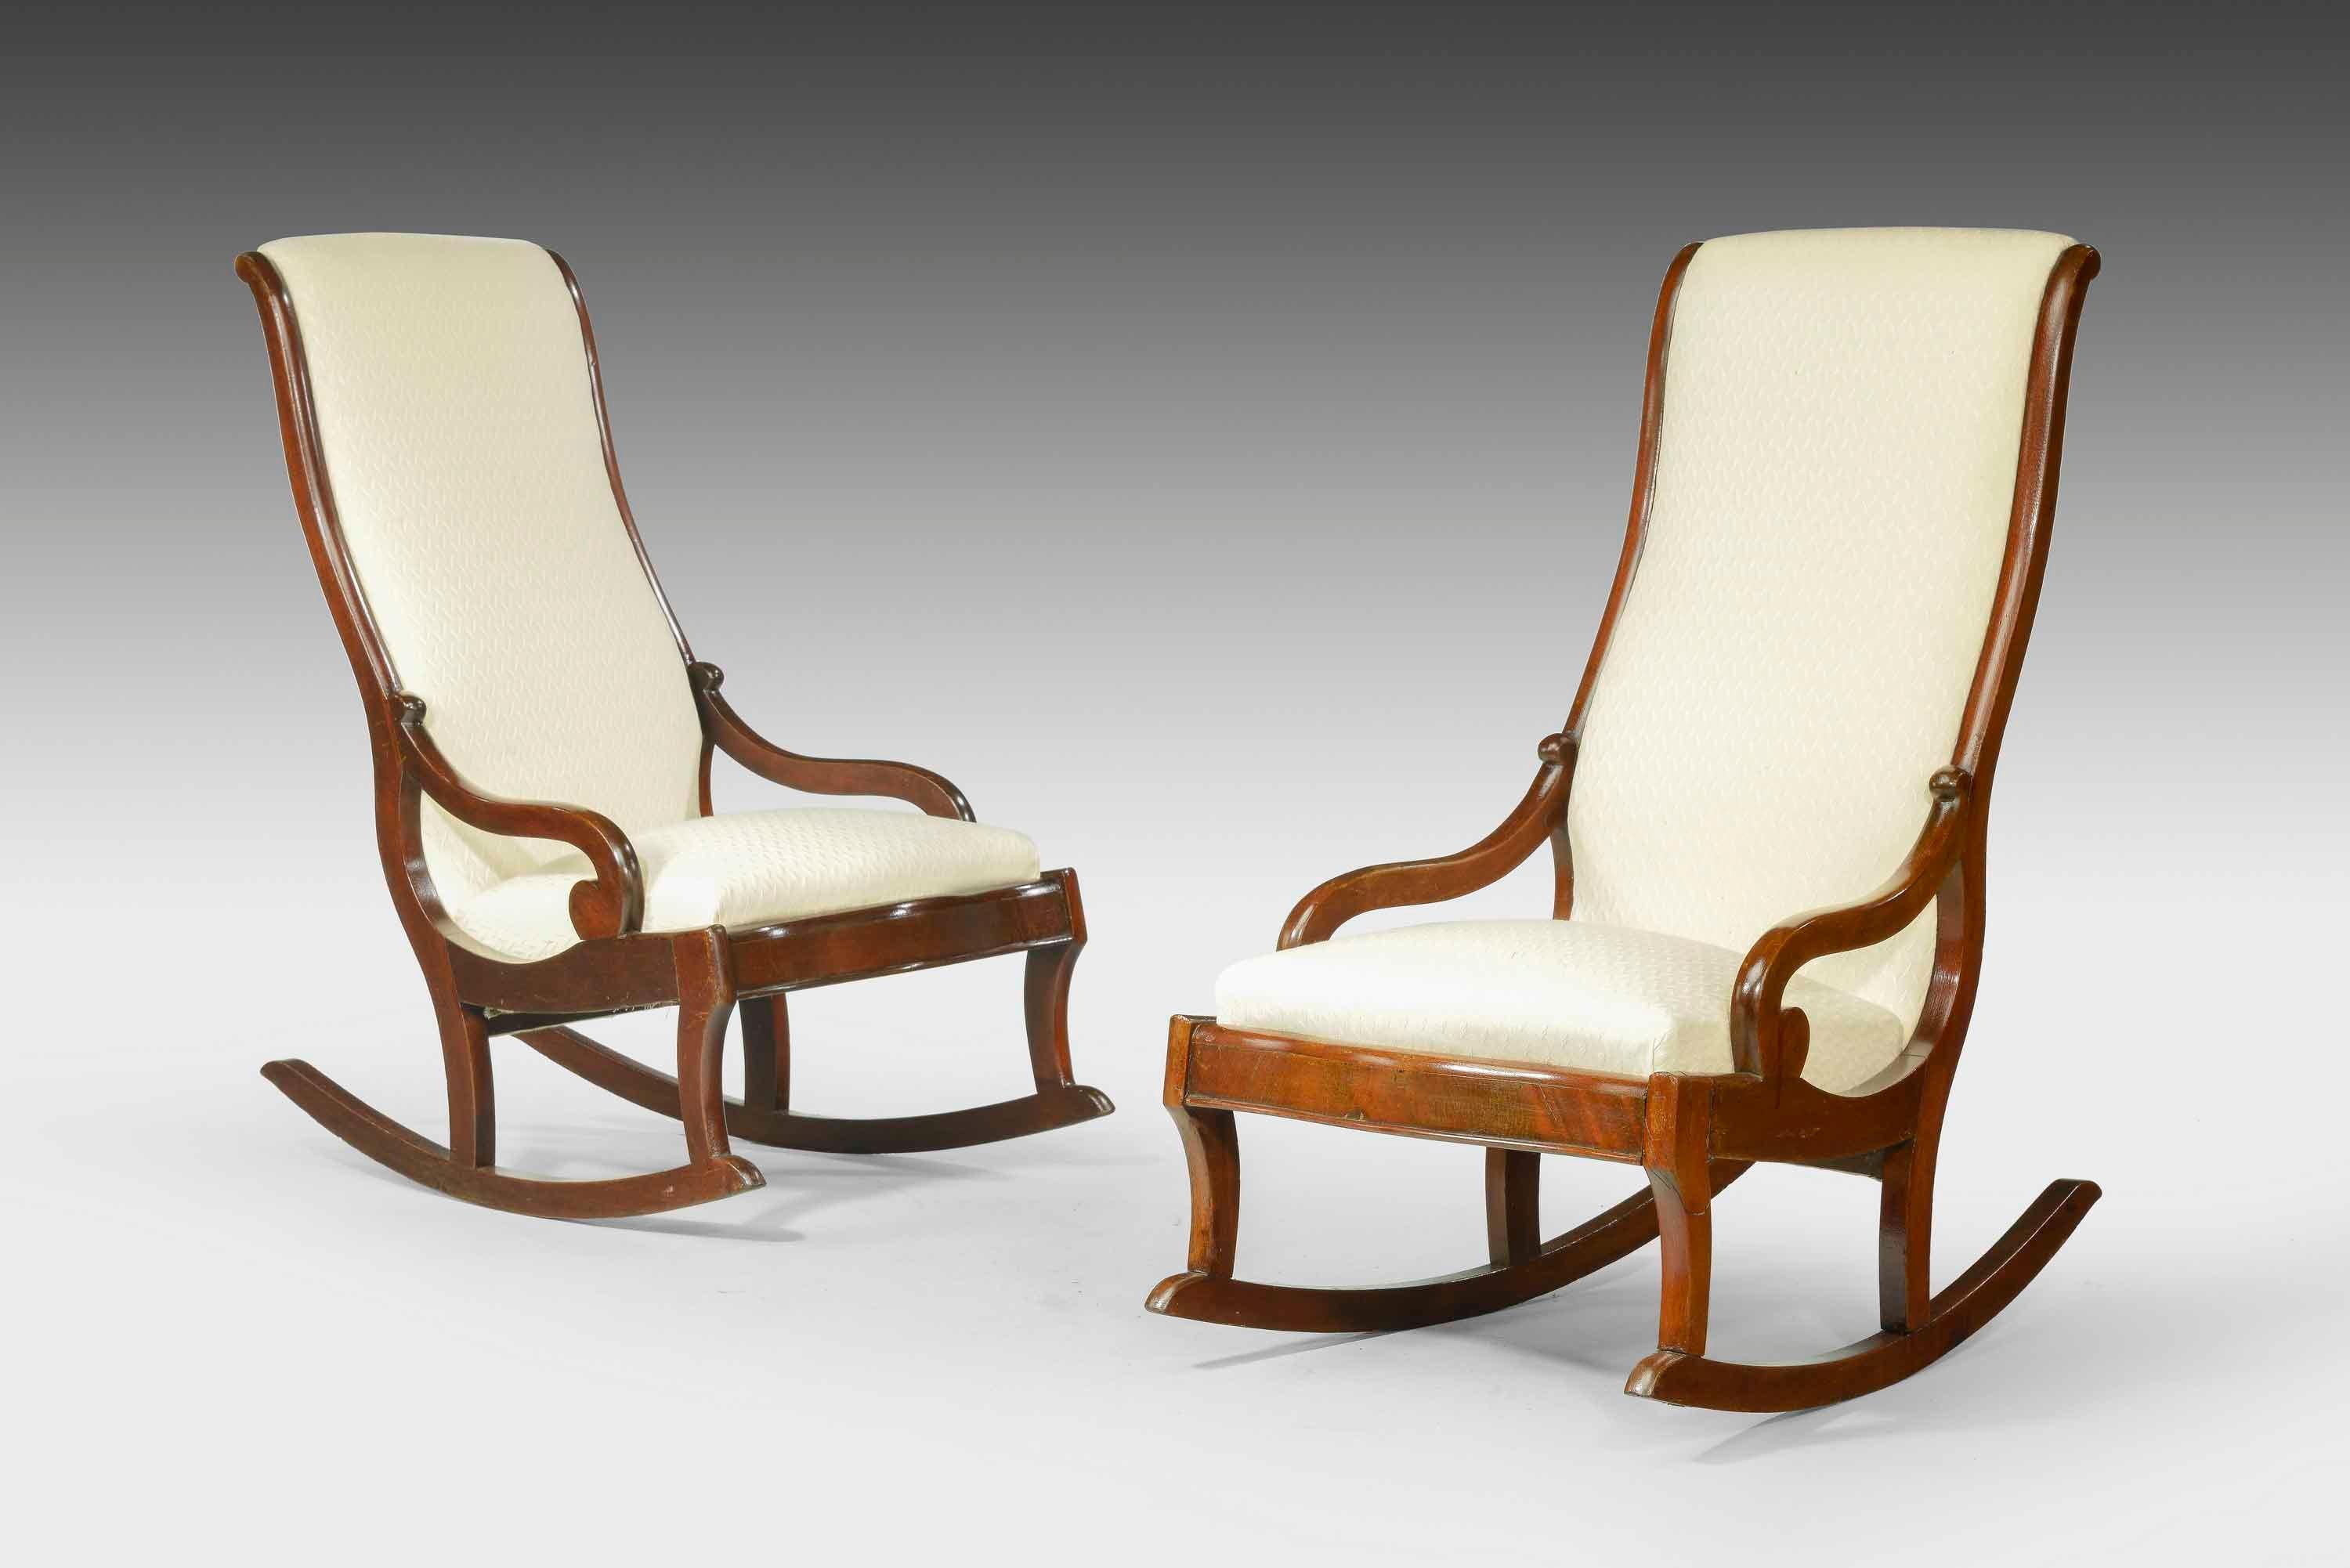 A Pair of Mid-19th Century Mahogany Framed Rocking Chairs In Good Condition In Peterborough, Northamptonshire